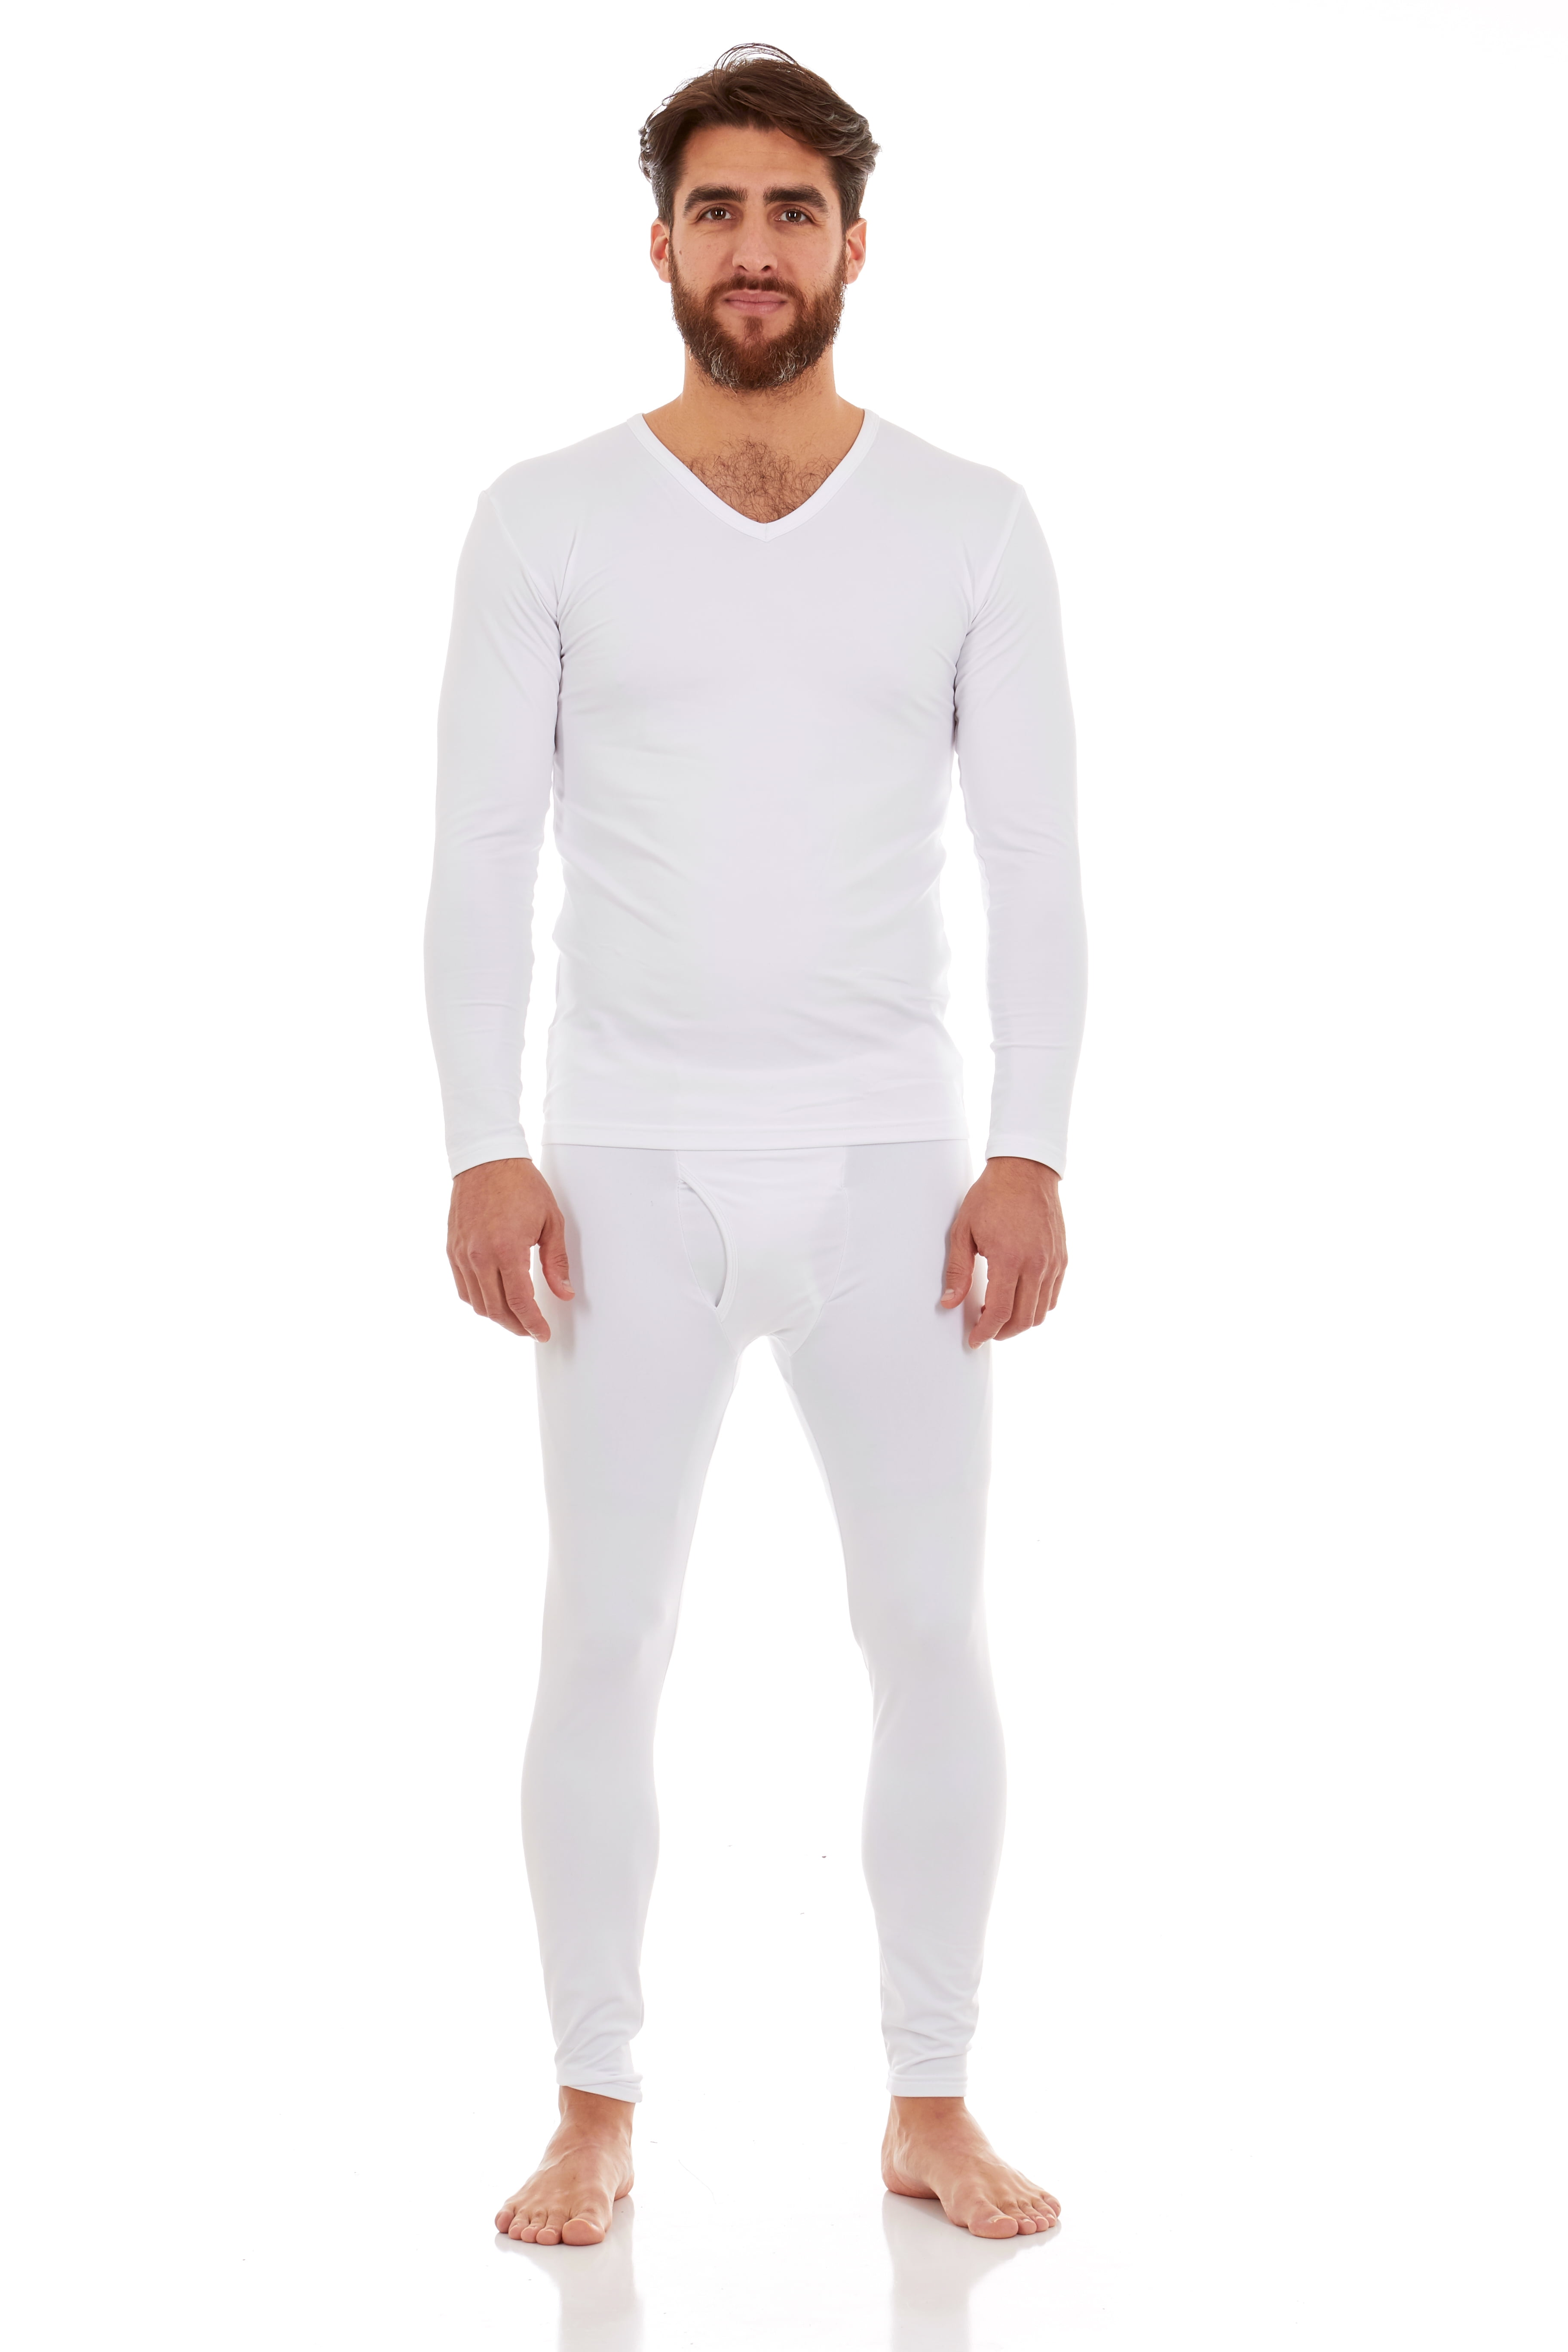 HeroBiker Men's Winter Thermal Top and Bottom with Fleece Lined